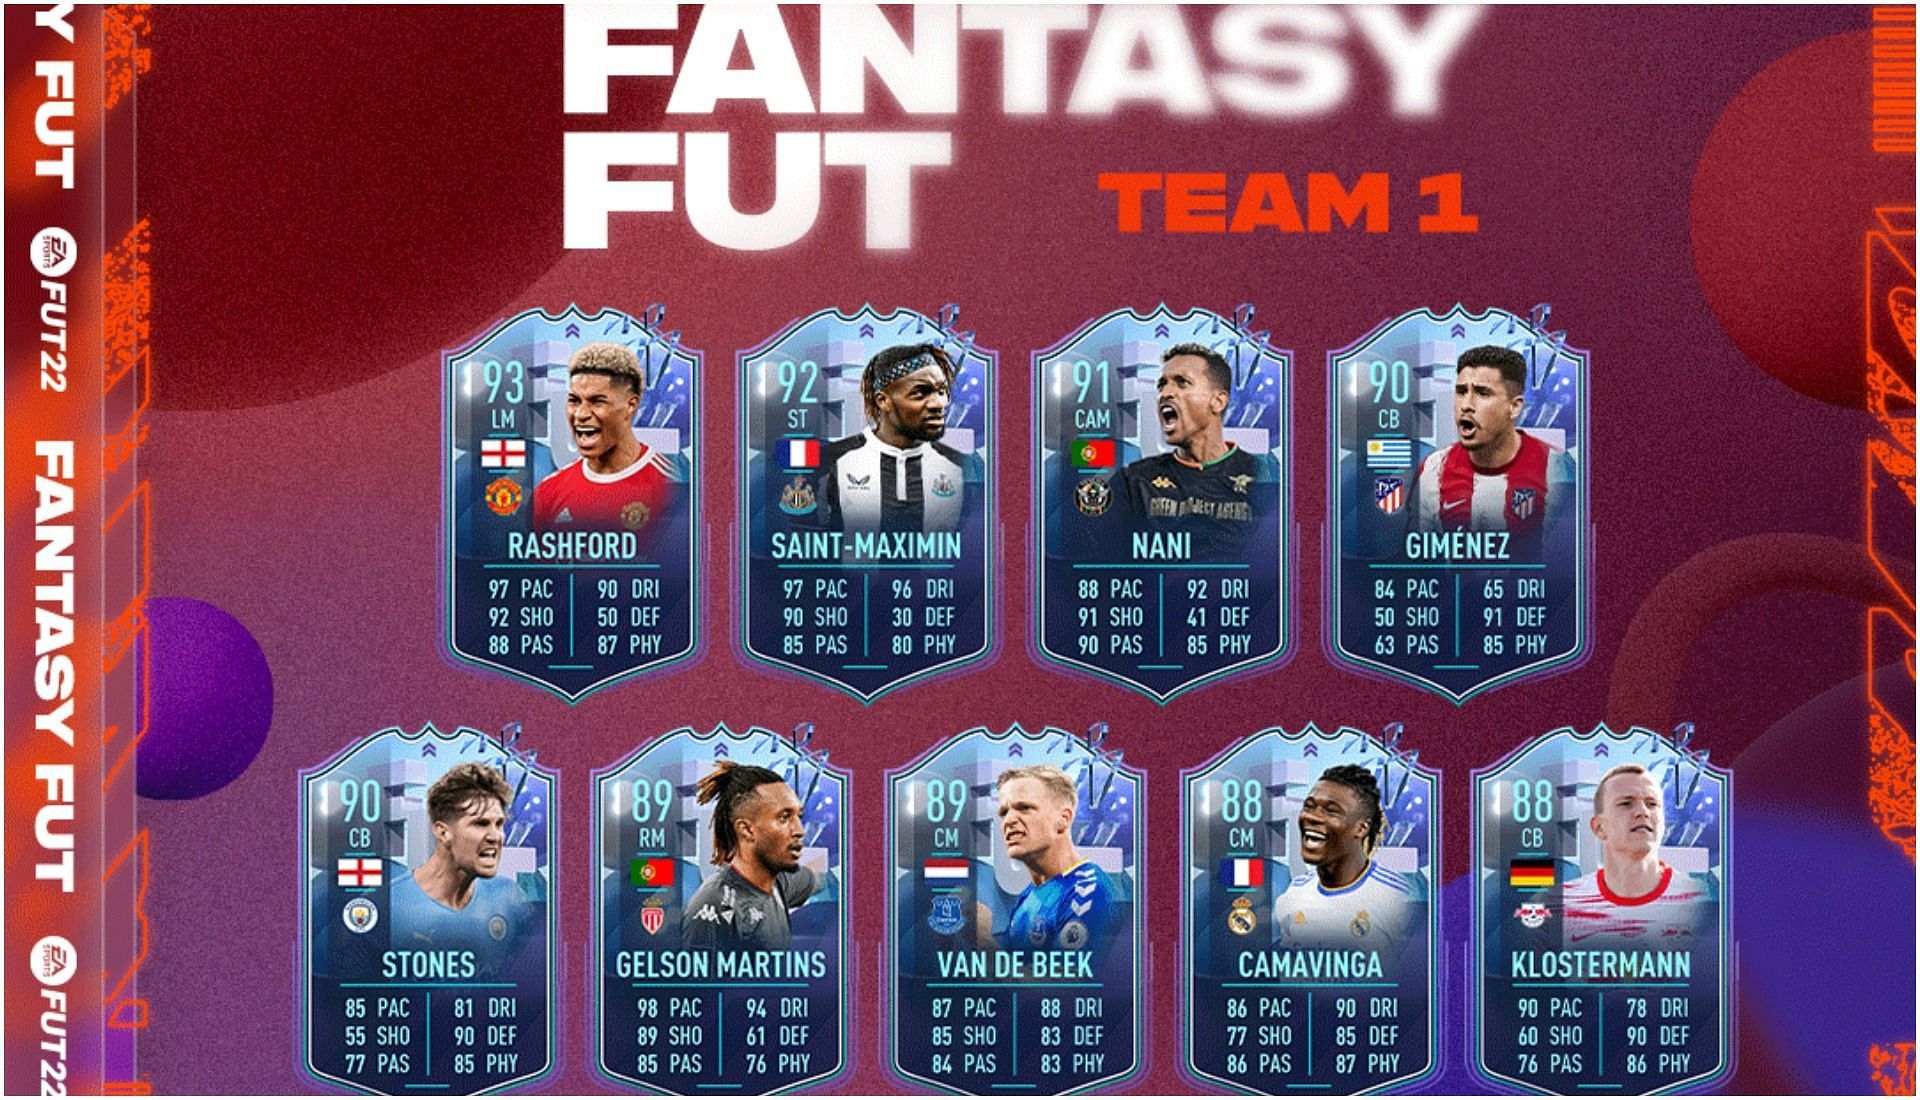 Fantasy FUT cards in FIFA 22 Ultimate Team has the chance to increase overall in future (Image via EA Sports)